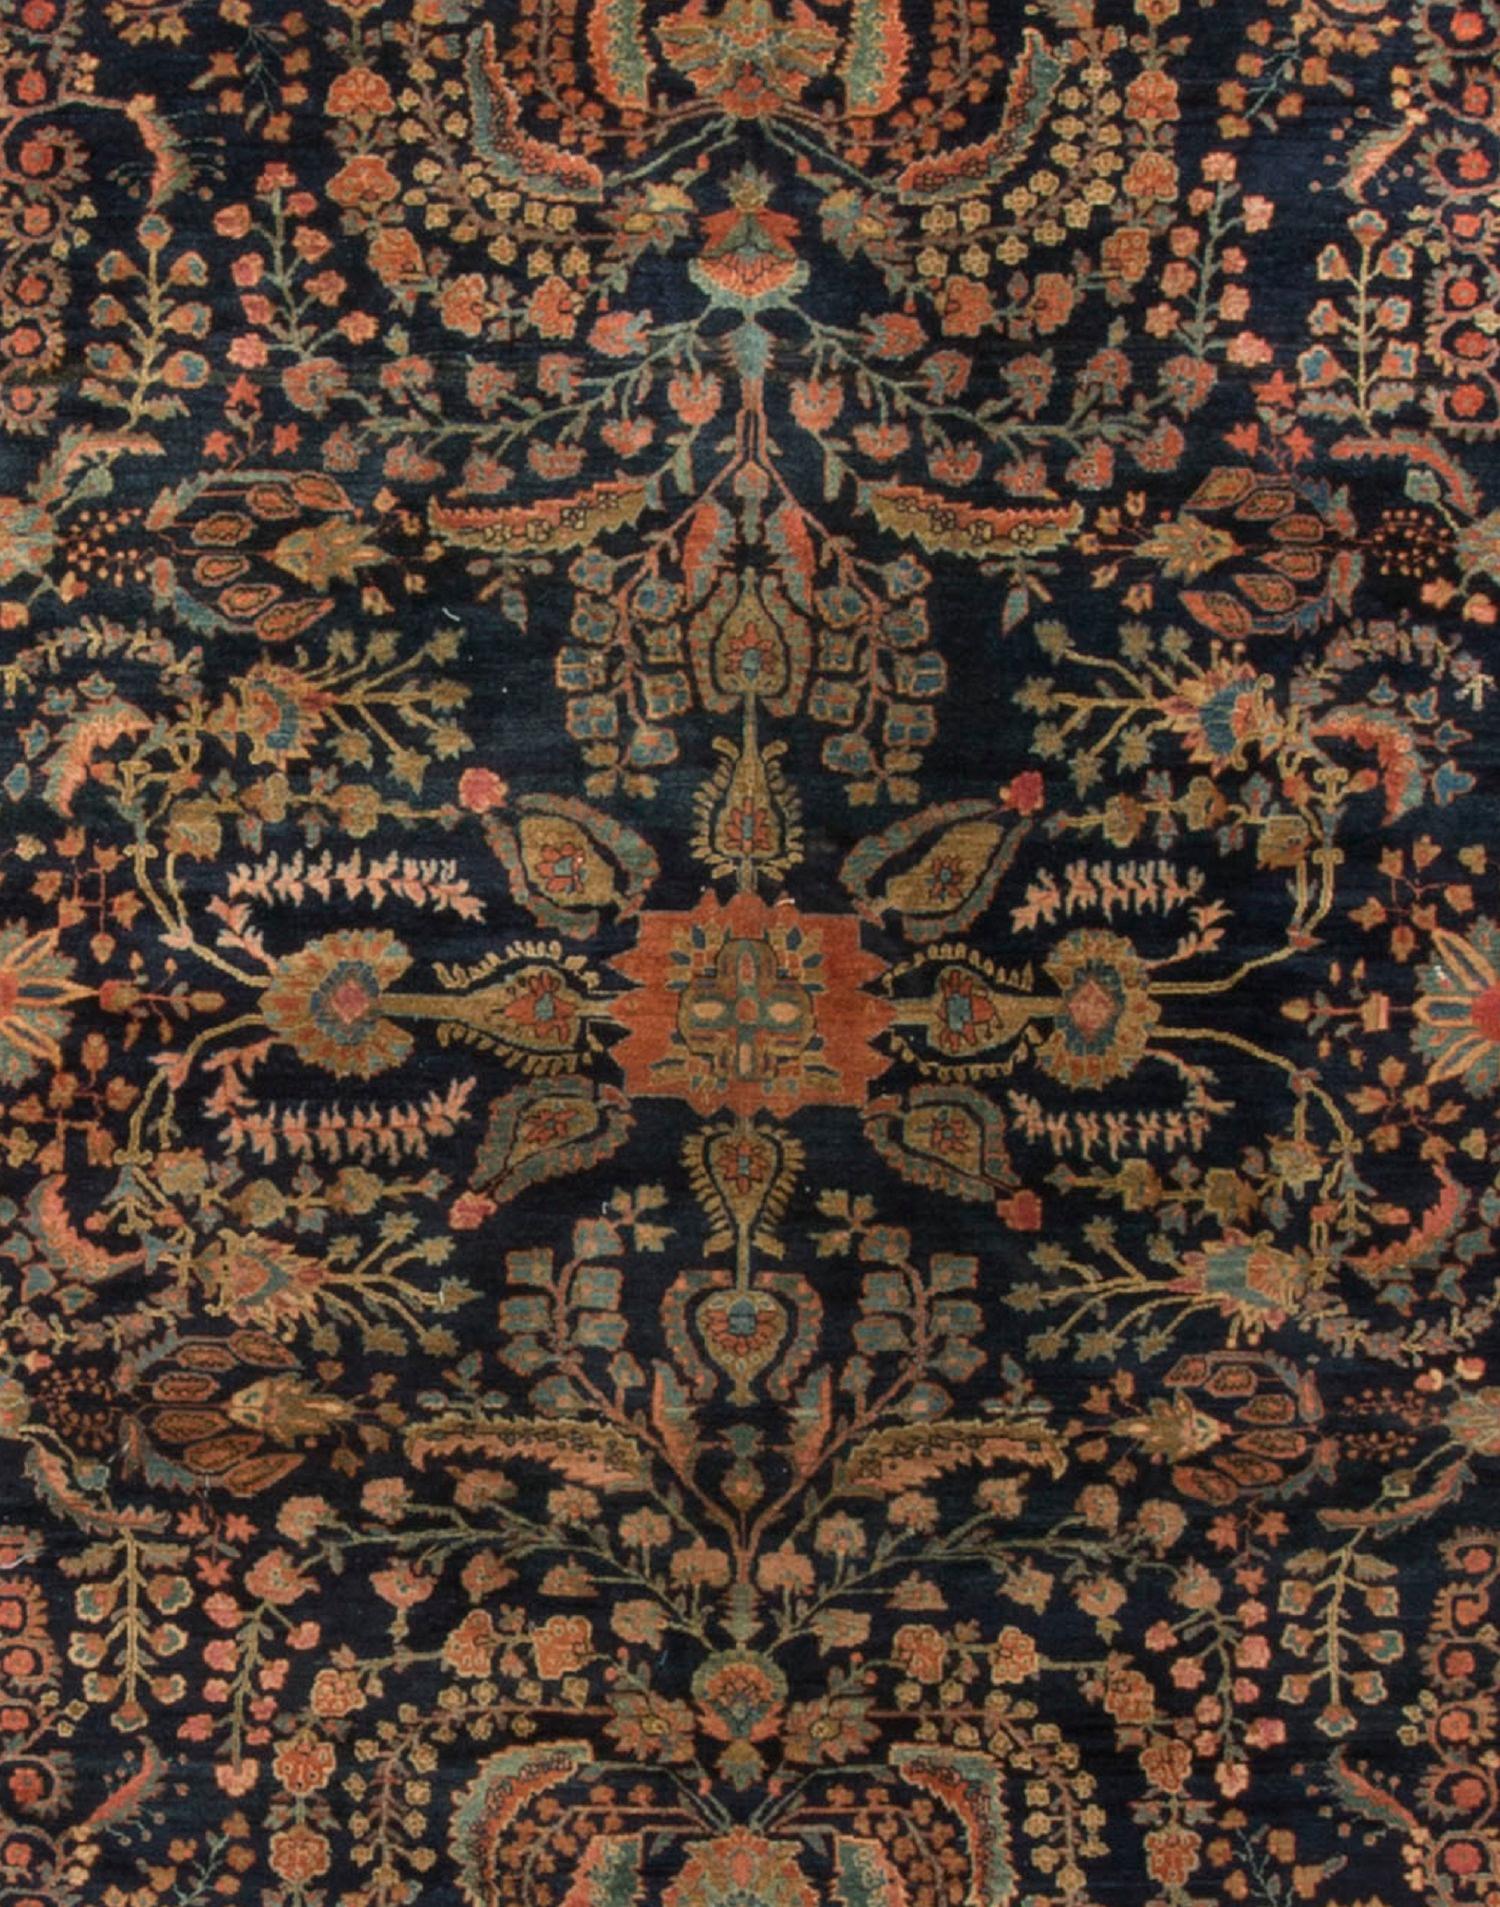 The deep navy field in this antique Persian Sarouk handwoven rug has a marvelous display of flowers sitting at either end of the rug in a pale blue vase. The central floral design adds to the overall look of lightness. The main border and two guard